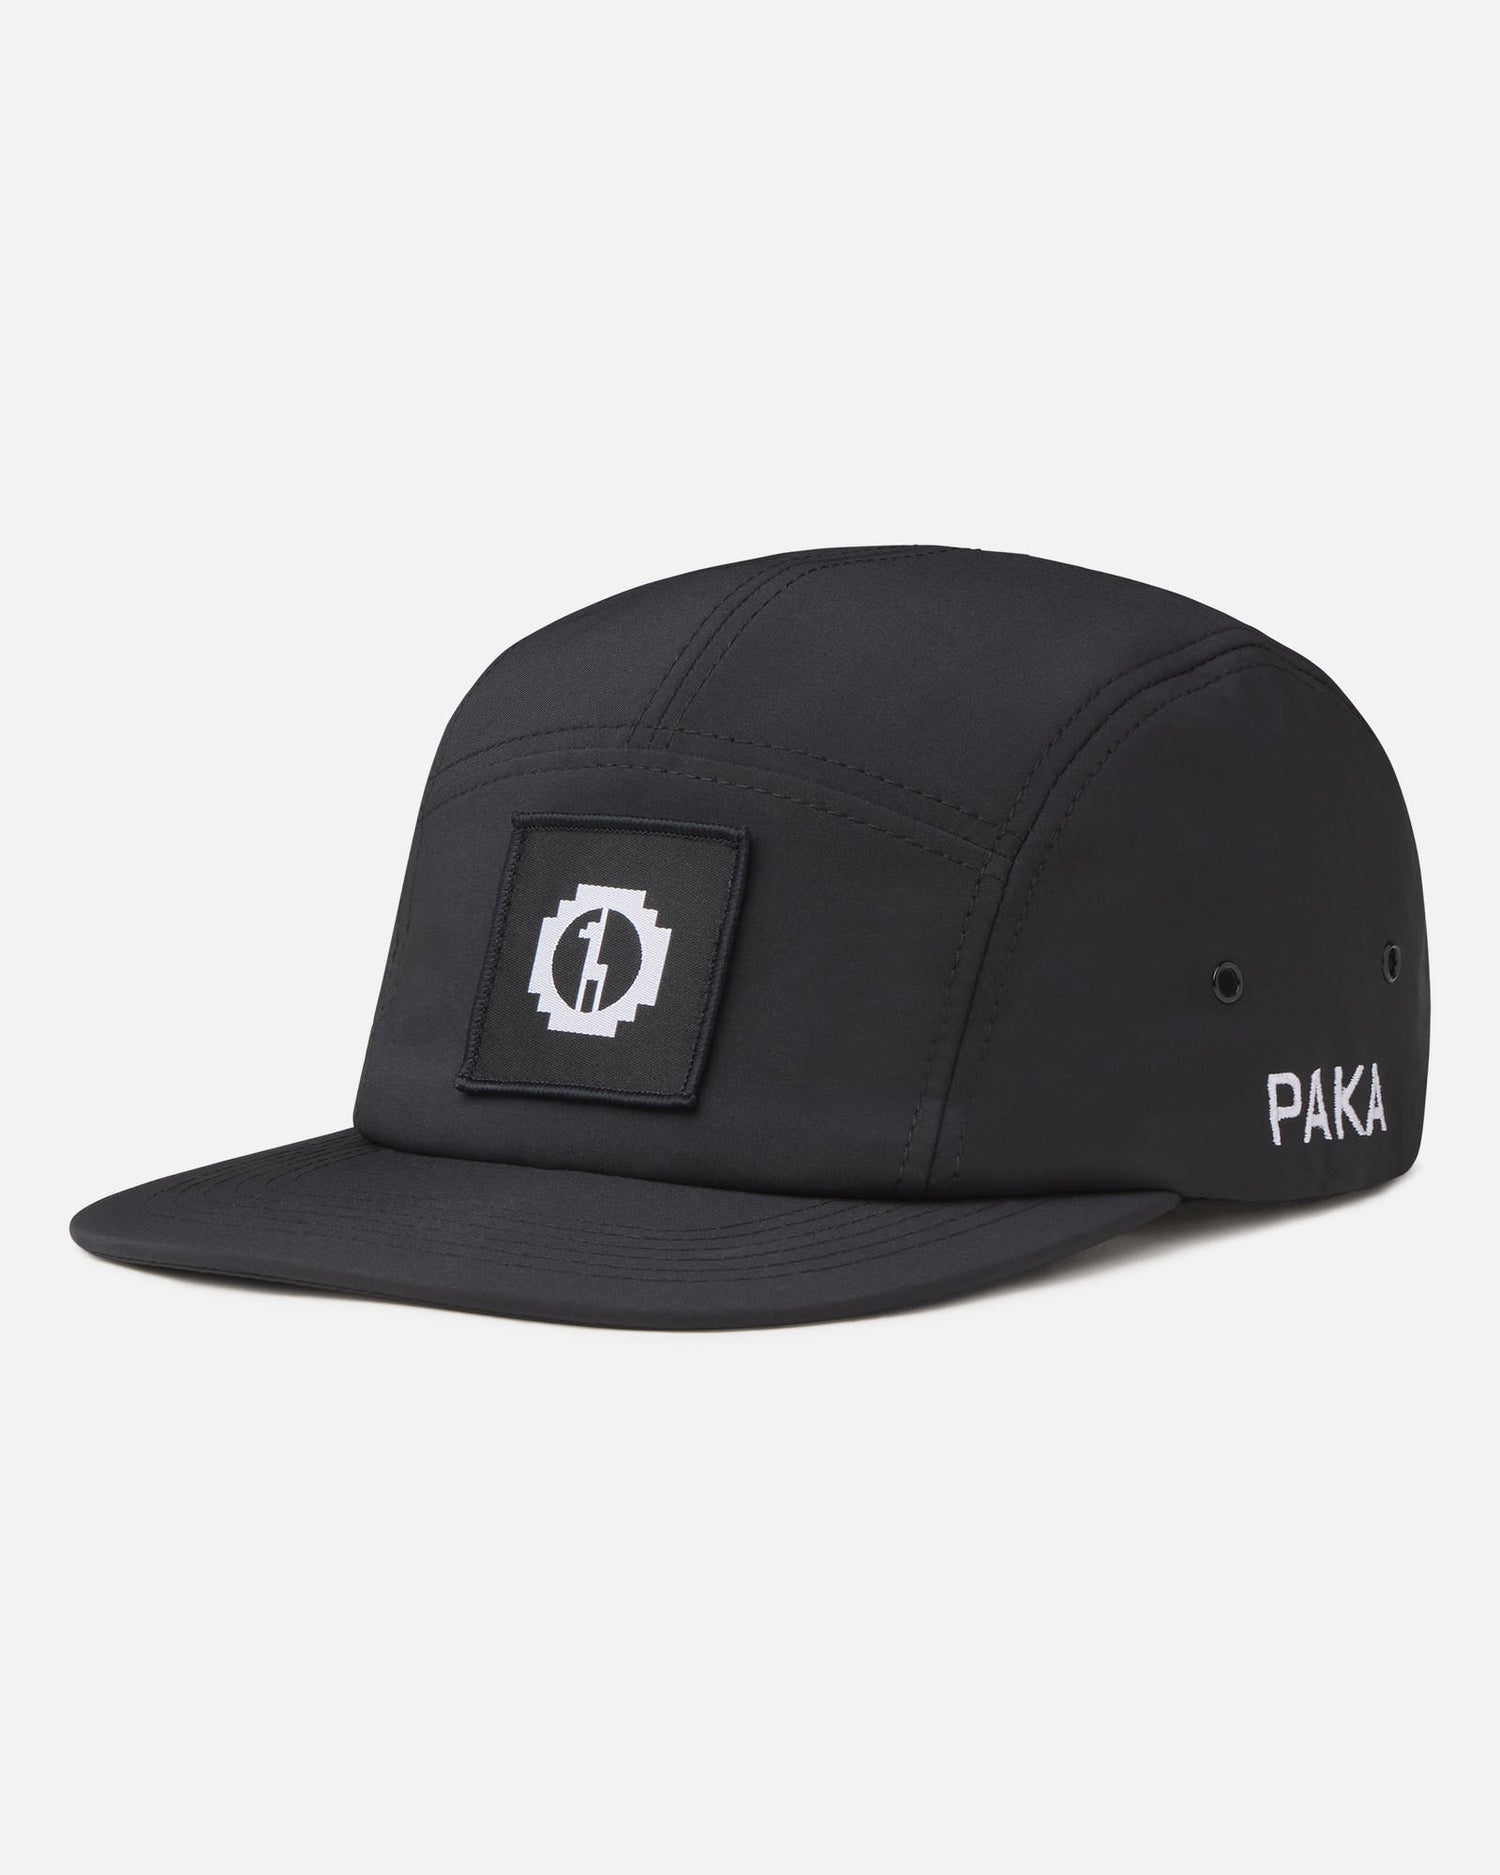 black 5 panel alpaca hat with paka logo on front and paka text on side